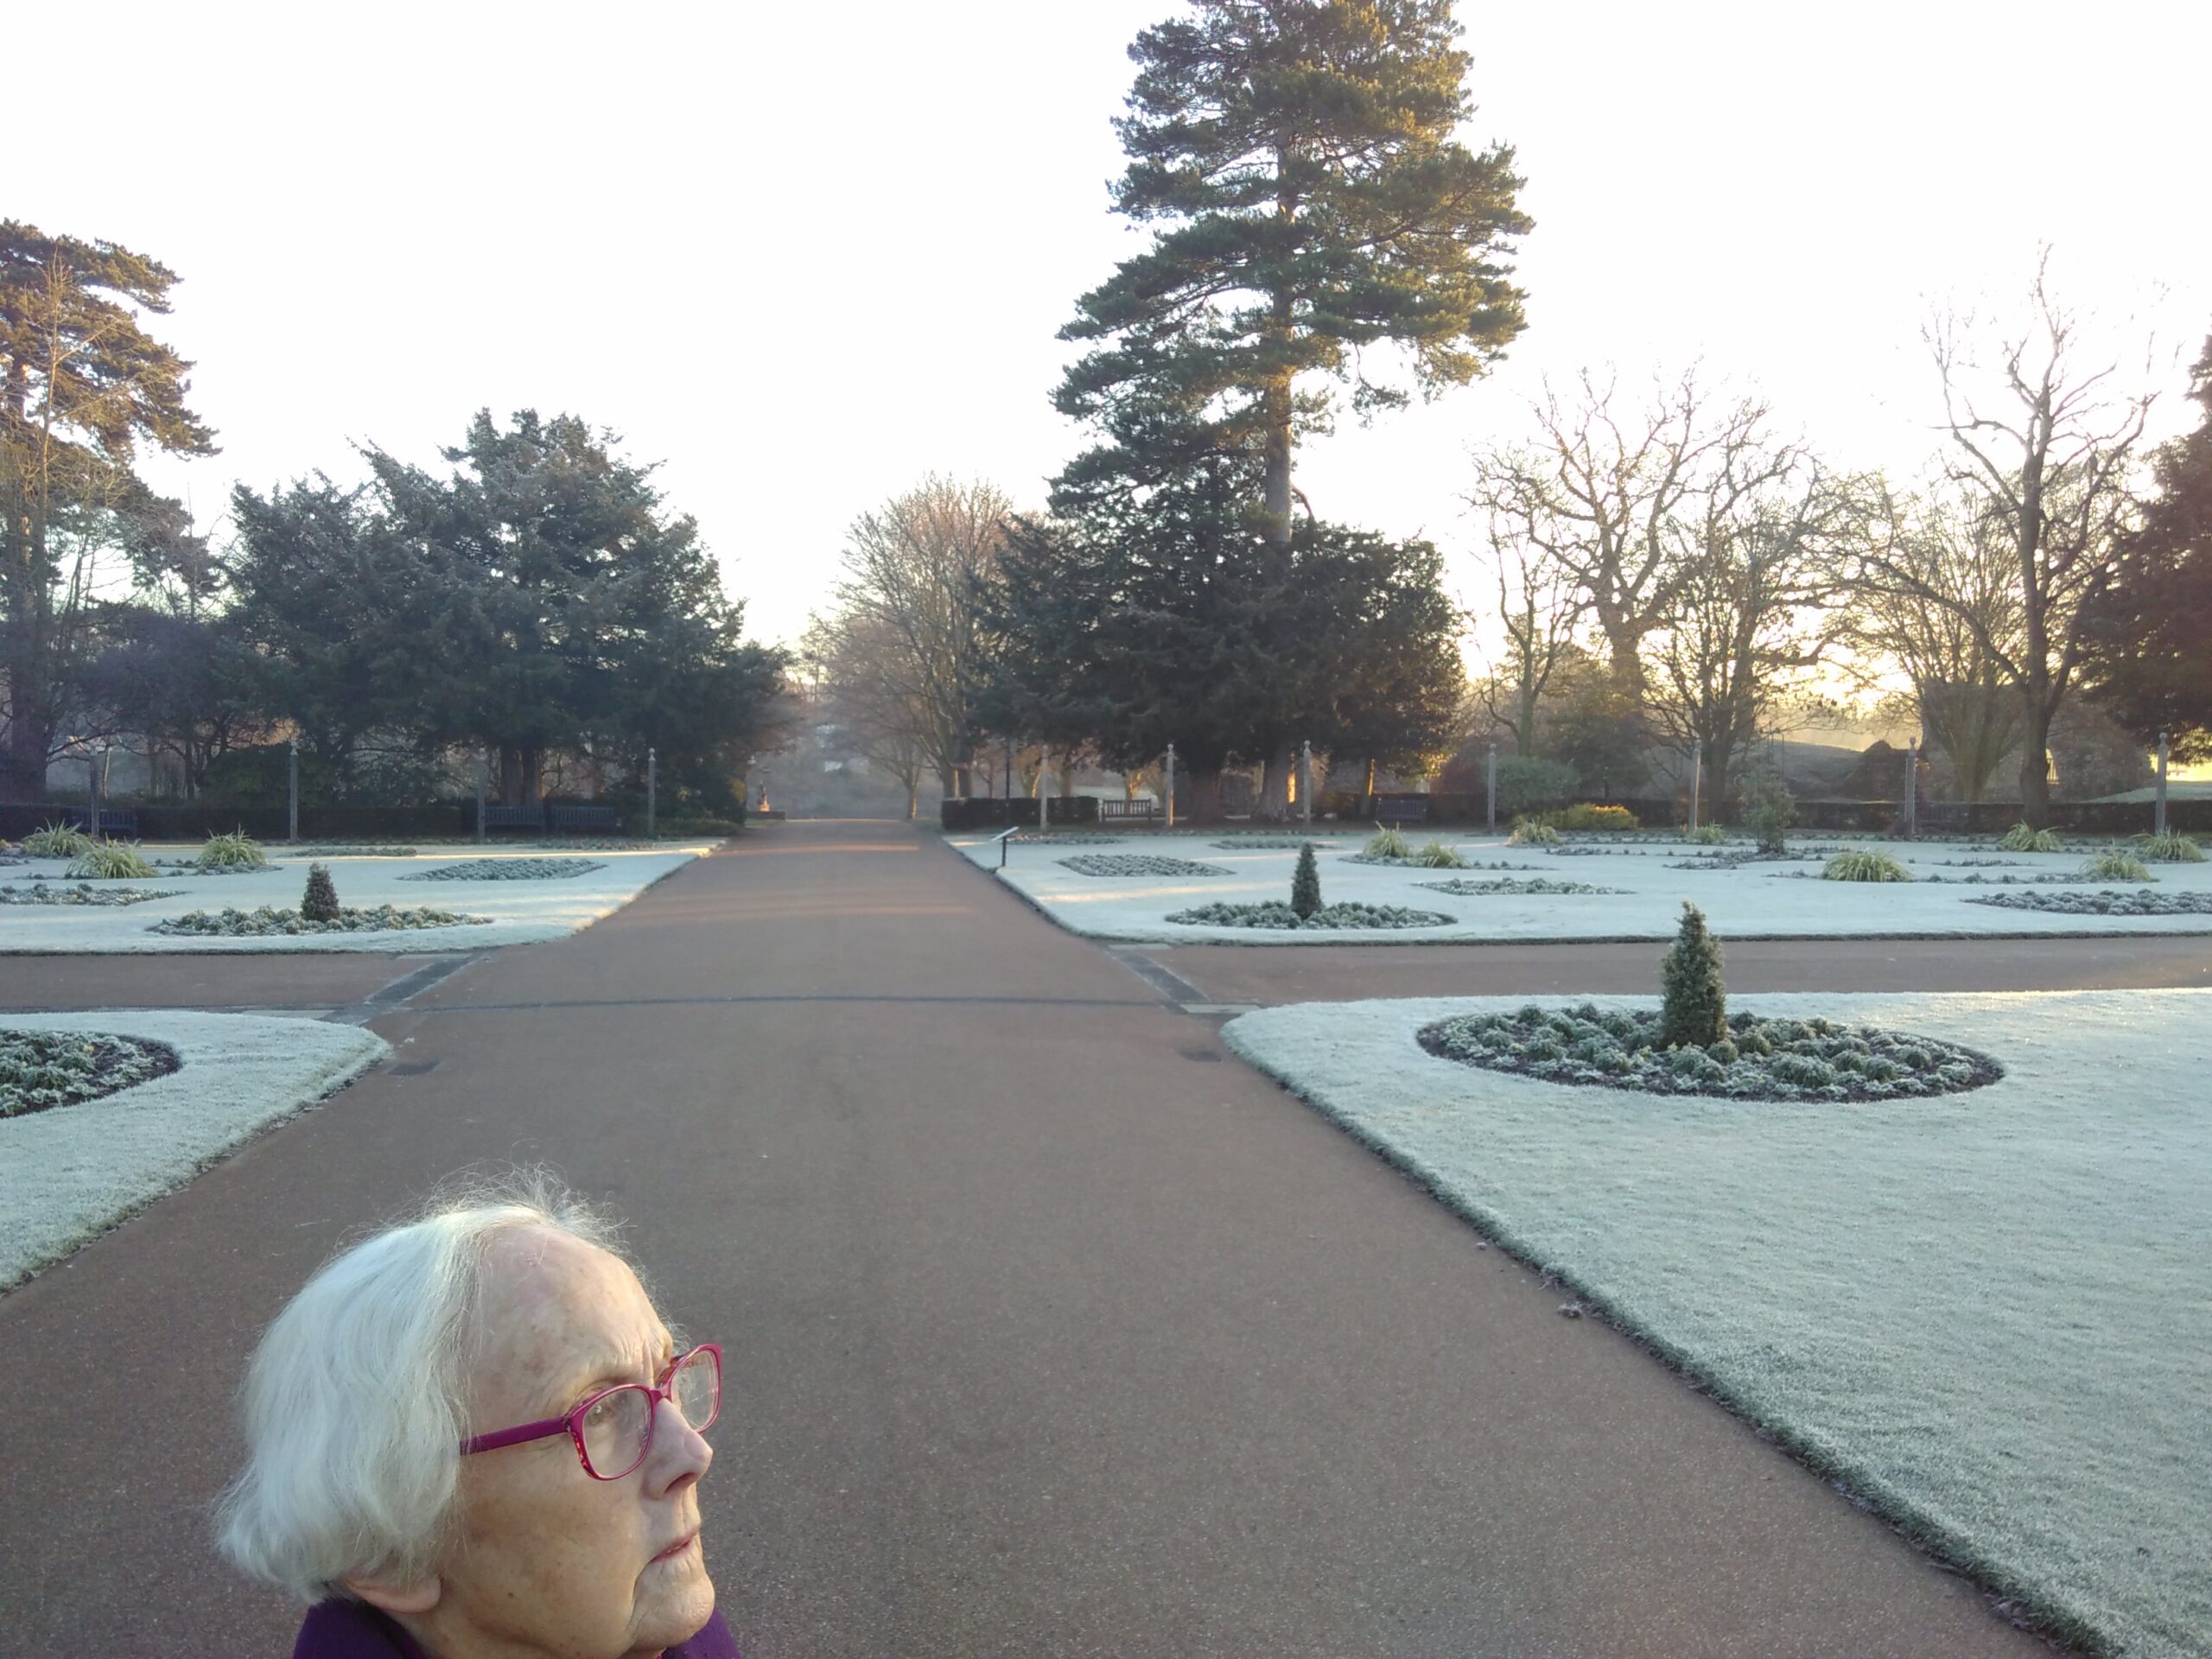 A woman looks into the trees, standing on a path between park frosted park lawns.